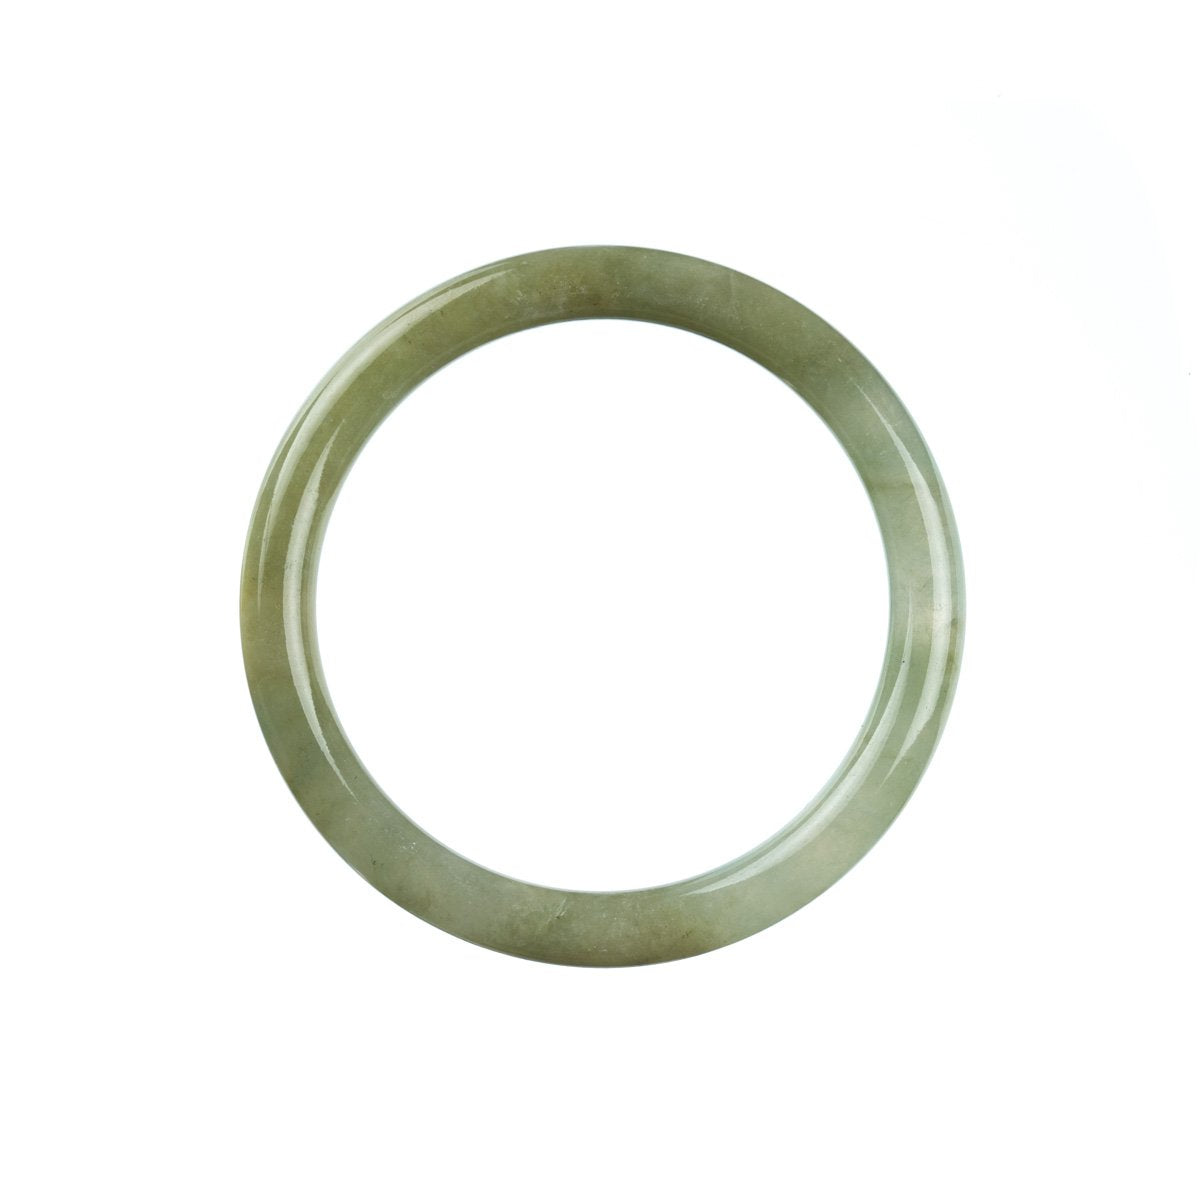 A round, 55mm authentic Type A Green Jade Bangle from MAYS.